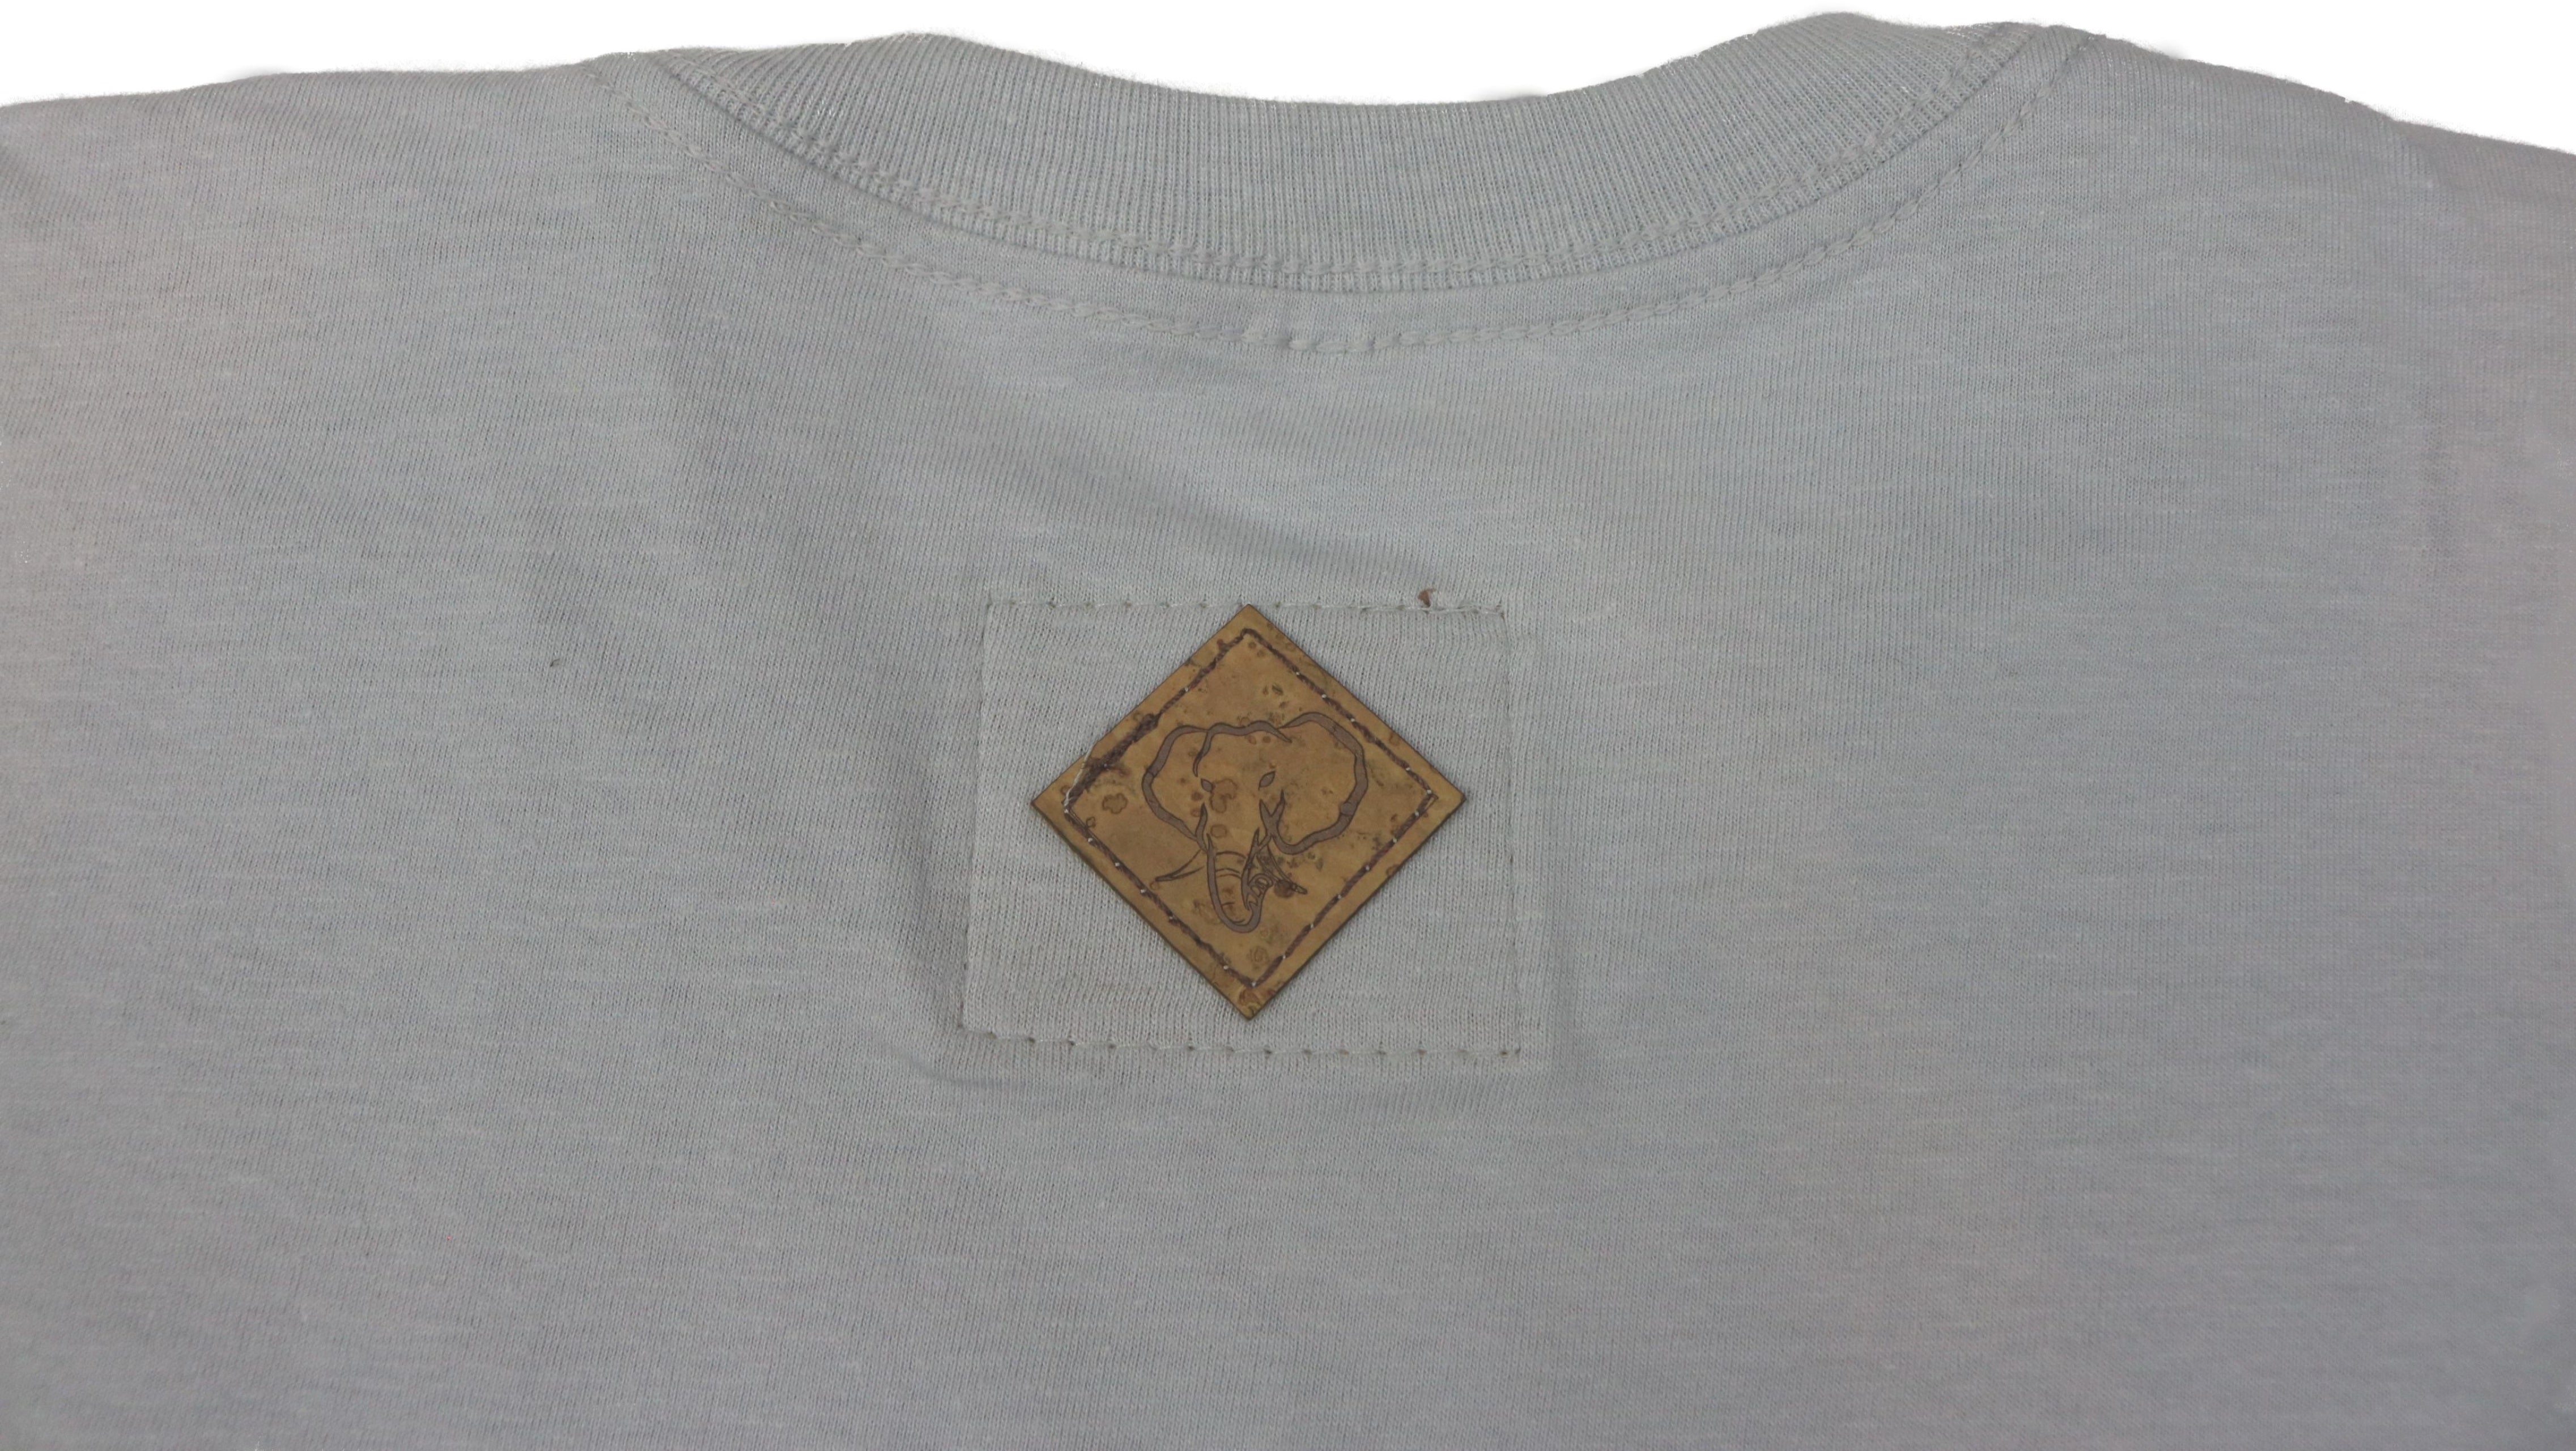 Elephant Head Crewneck Tee in Silver with Black Embroidery